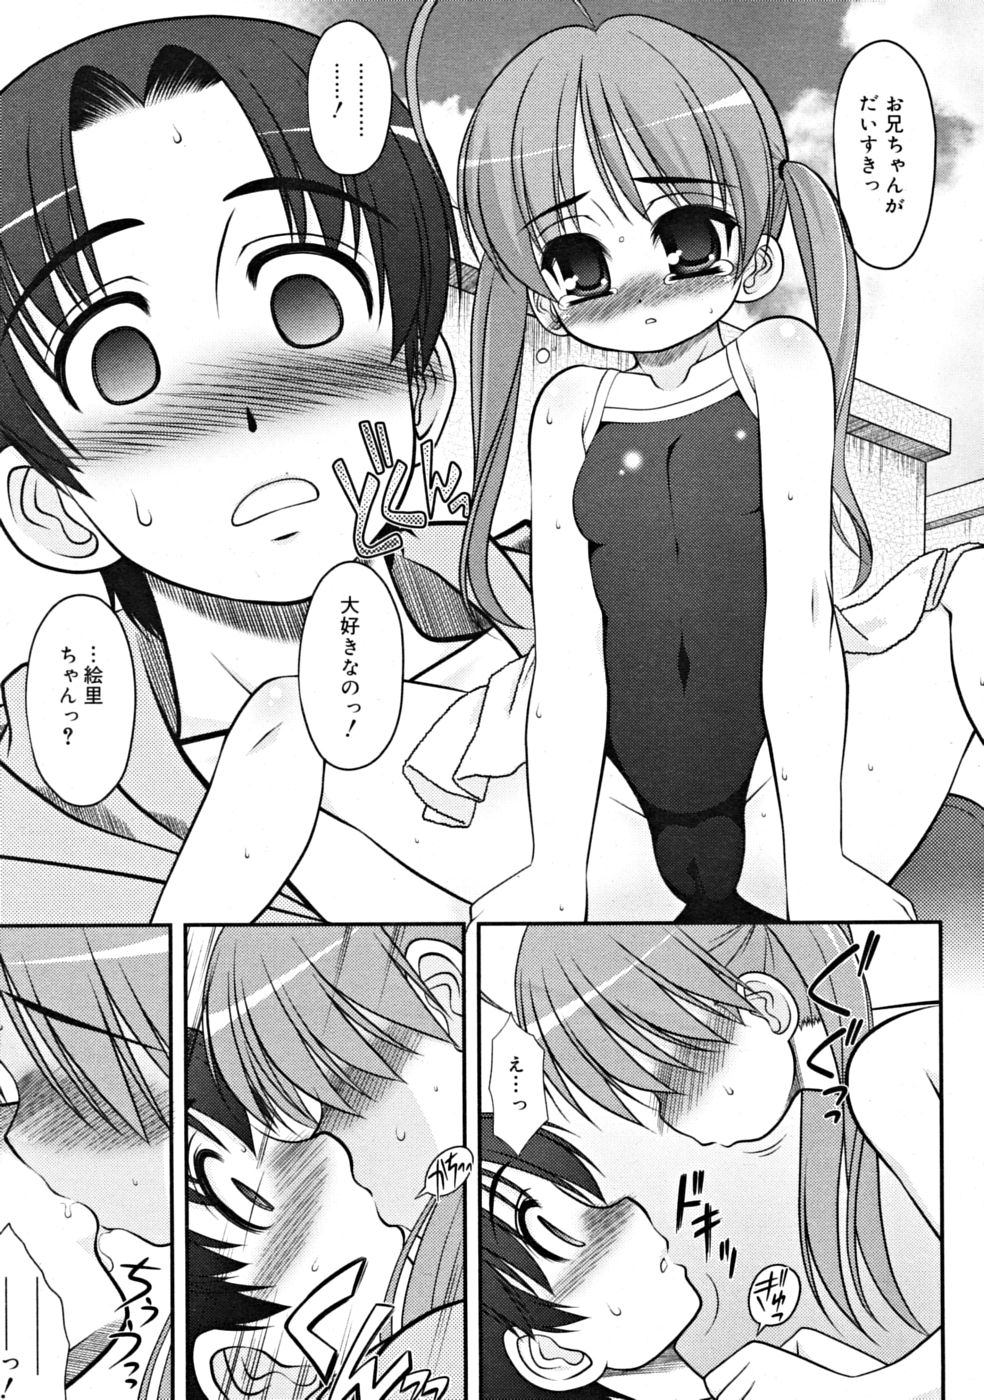 COMIC RiN 2008-09 page 31 full